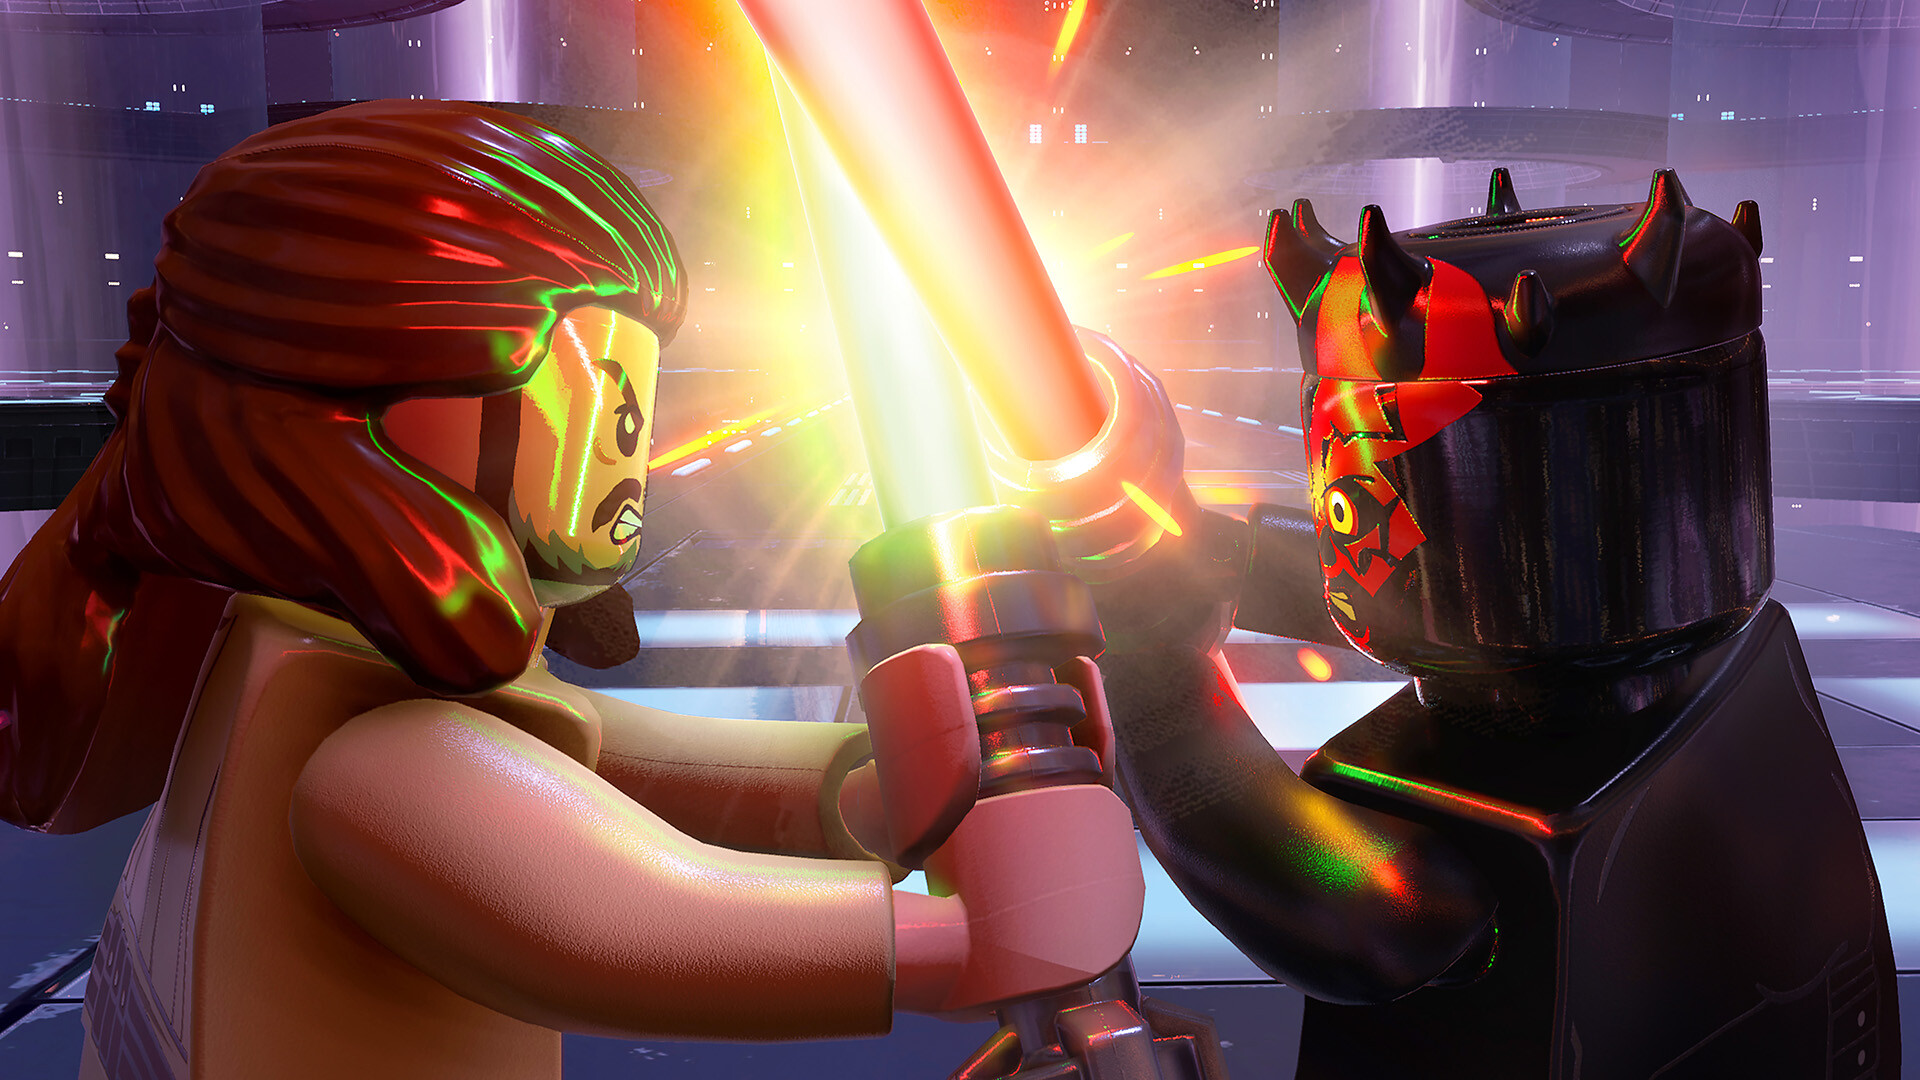 What Comes in the LEGO Star Wars: The Skywalker Saga Deluxe Edition